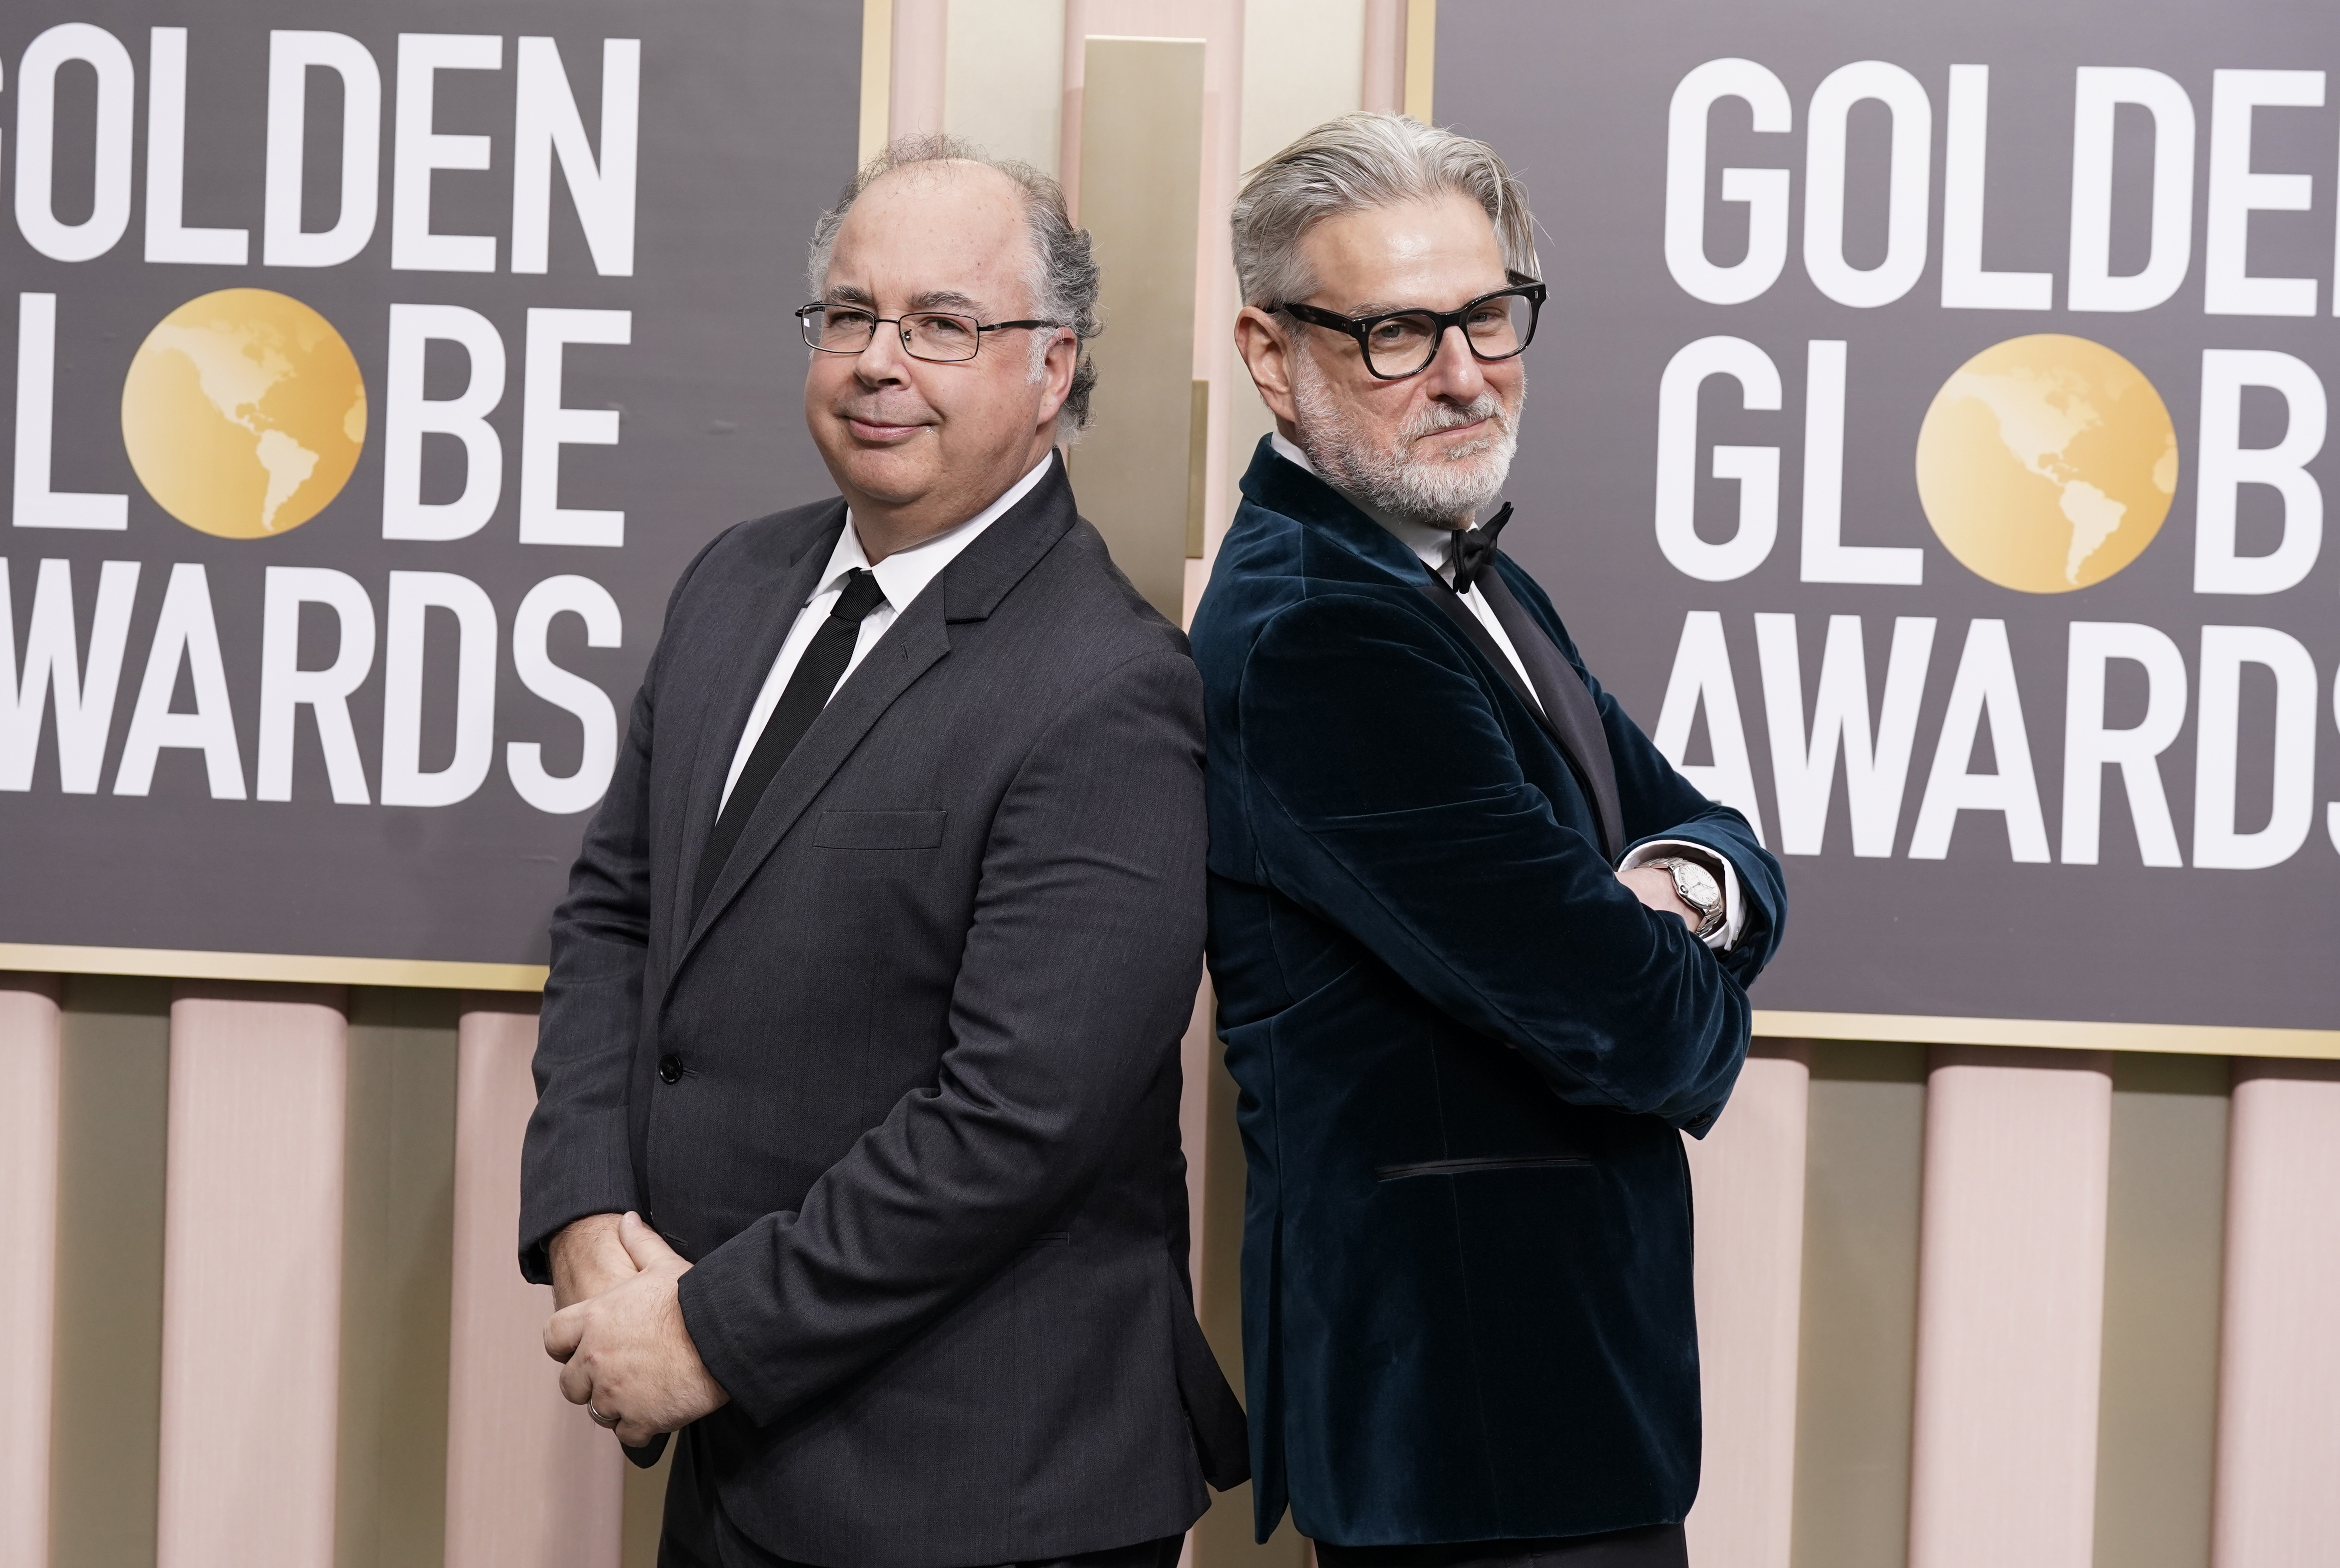 Thomas Schnauz, left, and Peter Gould arrive at the 80th annual Golden Globe Awards at the Beverly Hilton Hotel on Tuesday, Jan. 10, 2023, in Beverly Hills, Calif. (Photo by Jordan Strauss/Invision/AP)